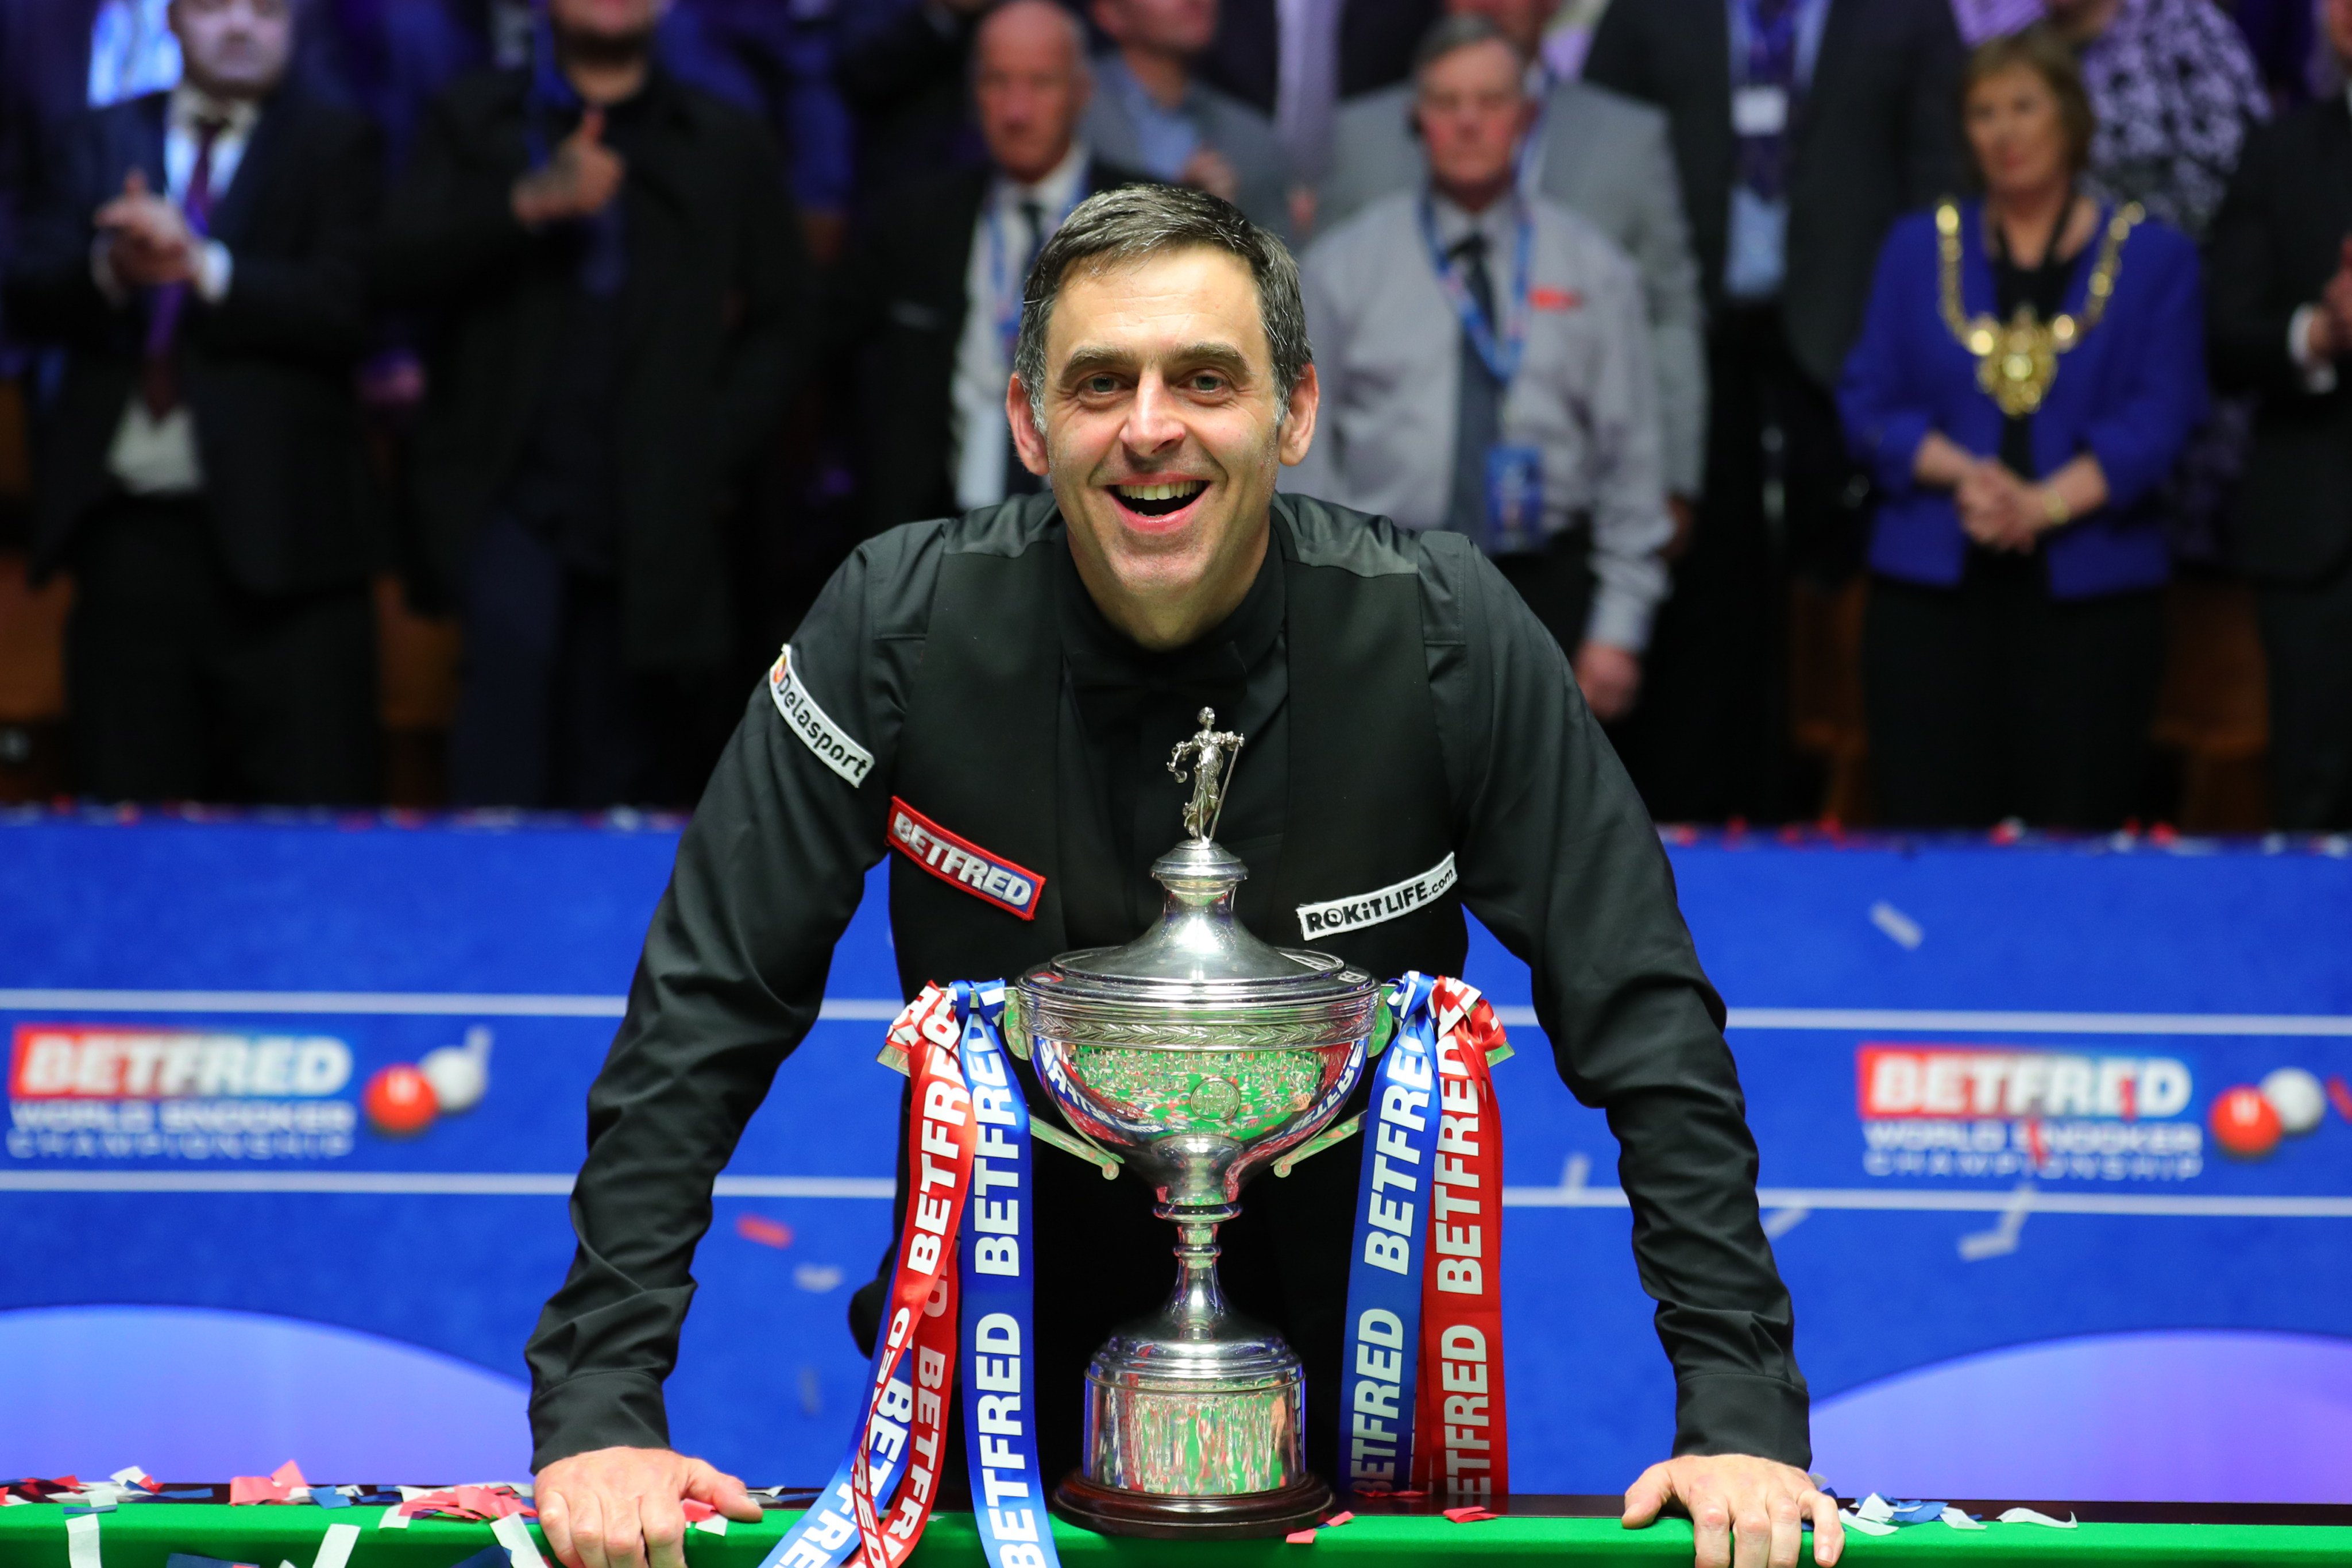 Ronnie O’Sullivan celebrates with the trophy after winning his seventh world championship in Sheffield, England. Photo: Xinhua